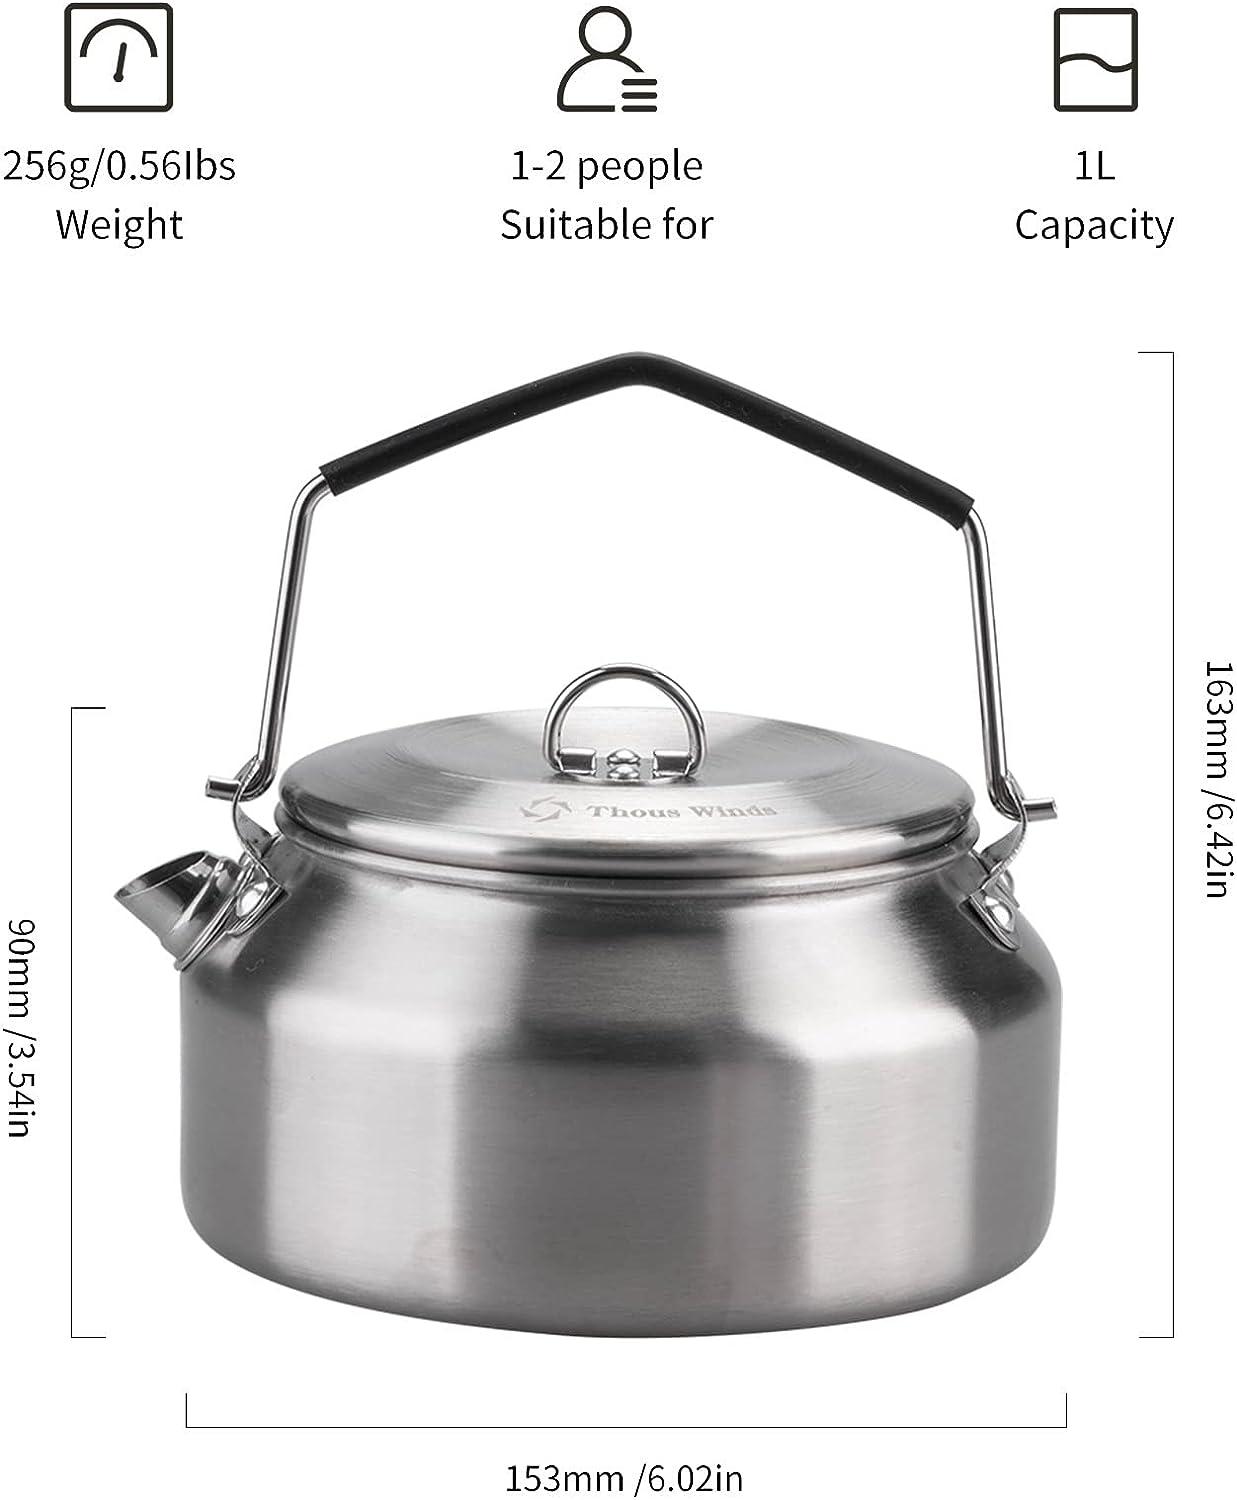 ThousWinds Camping Kettle 1Liter, Camp Tea Coffee Pot Stainless